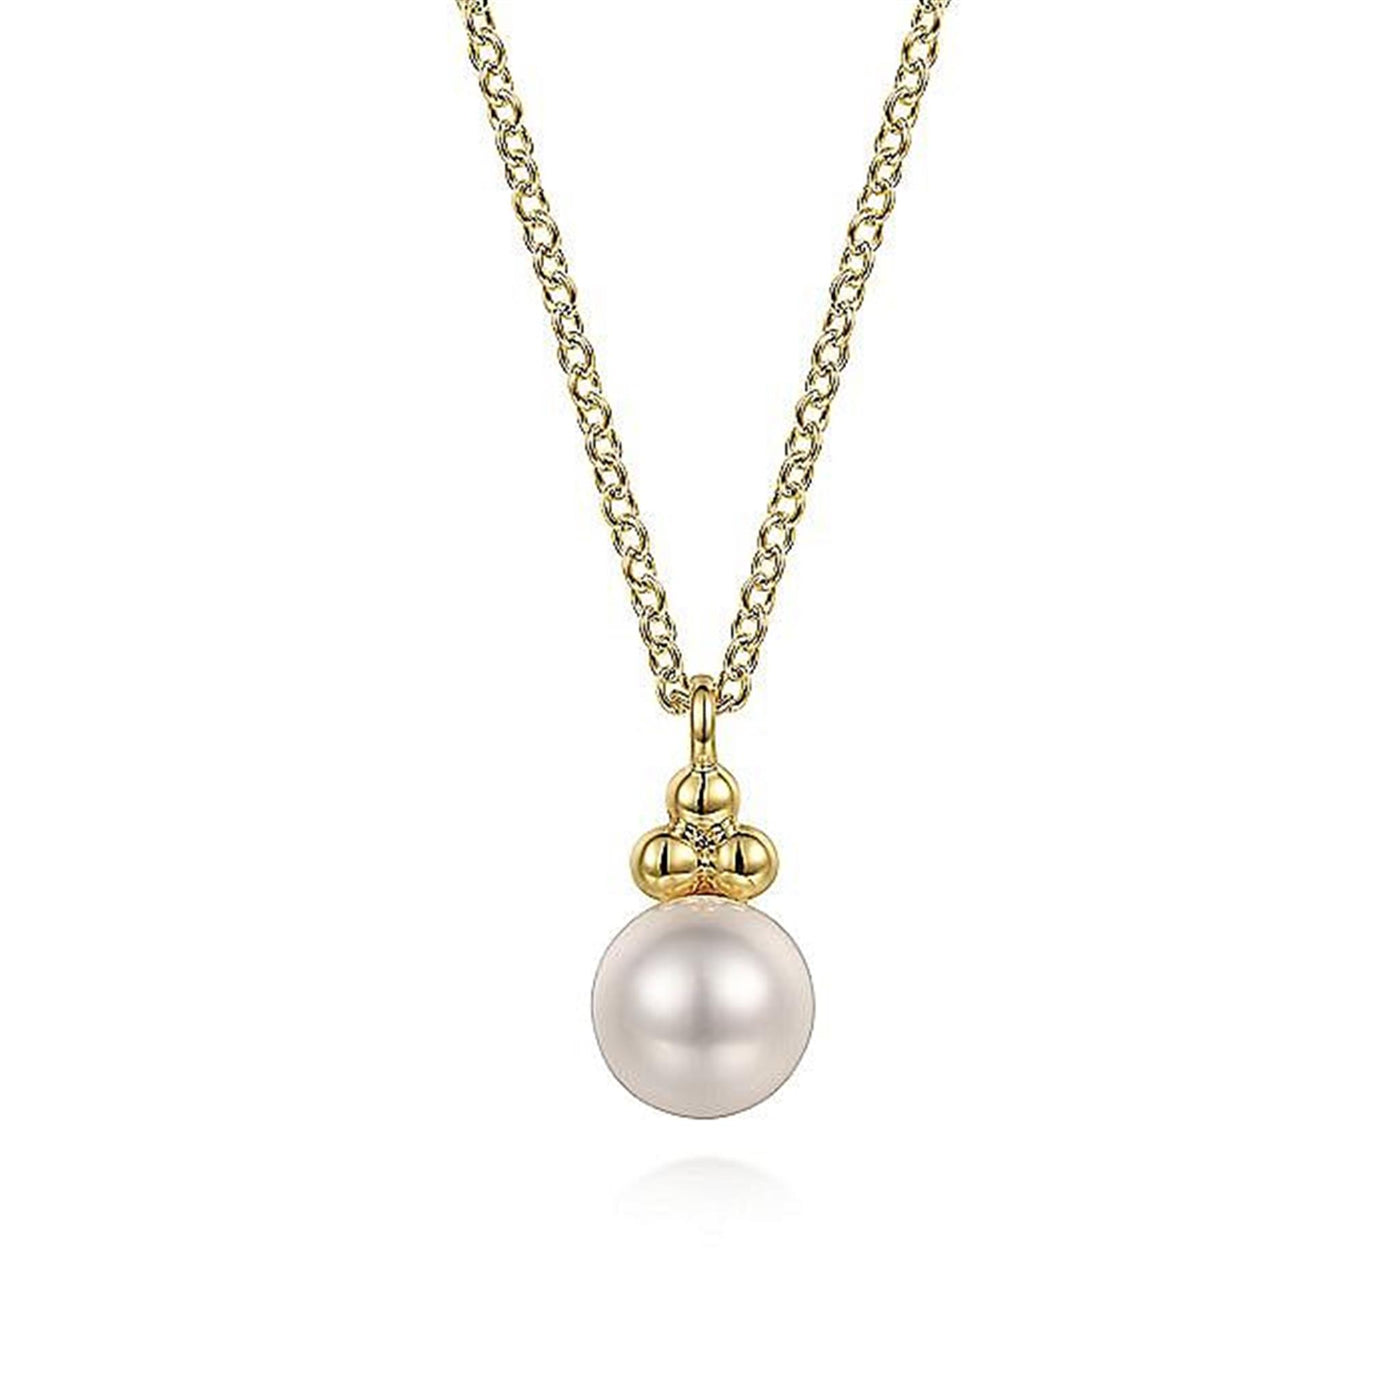 Gabriel - Bujukan Collection 14K Yellow Gold 17.5" Adjustable .36ctw Freshwater Pearl Drop Solitaire Necklace